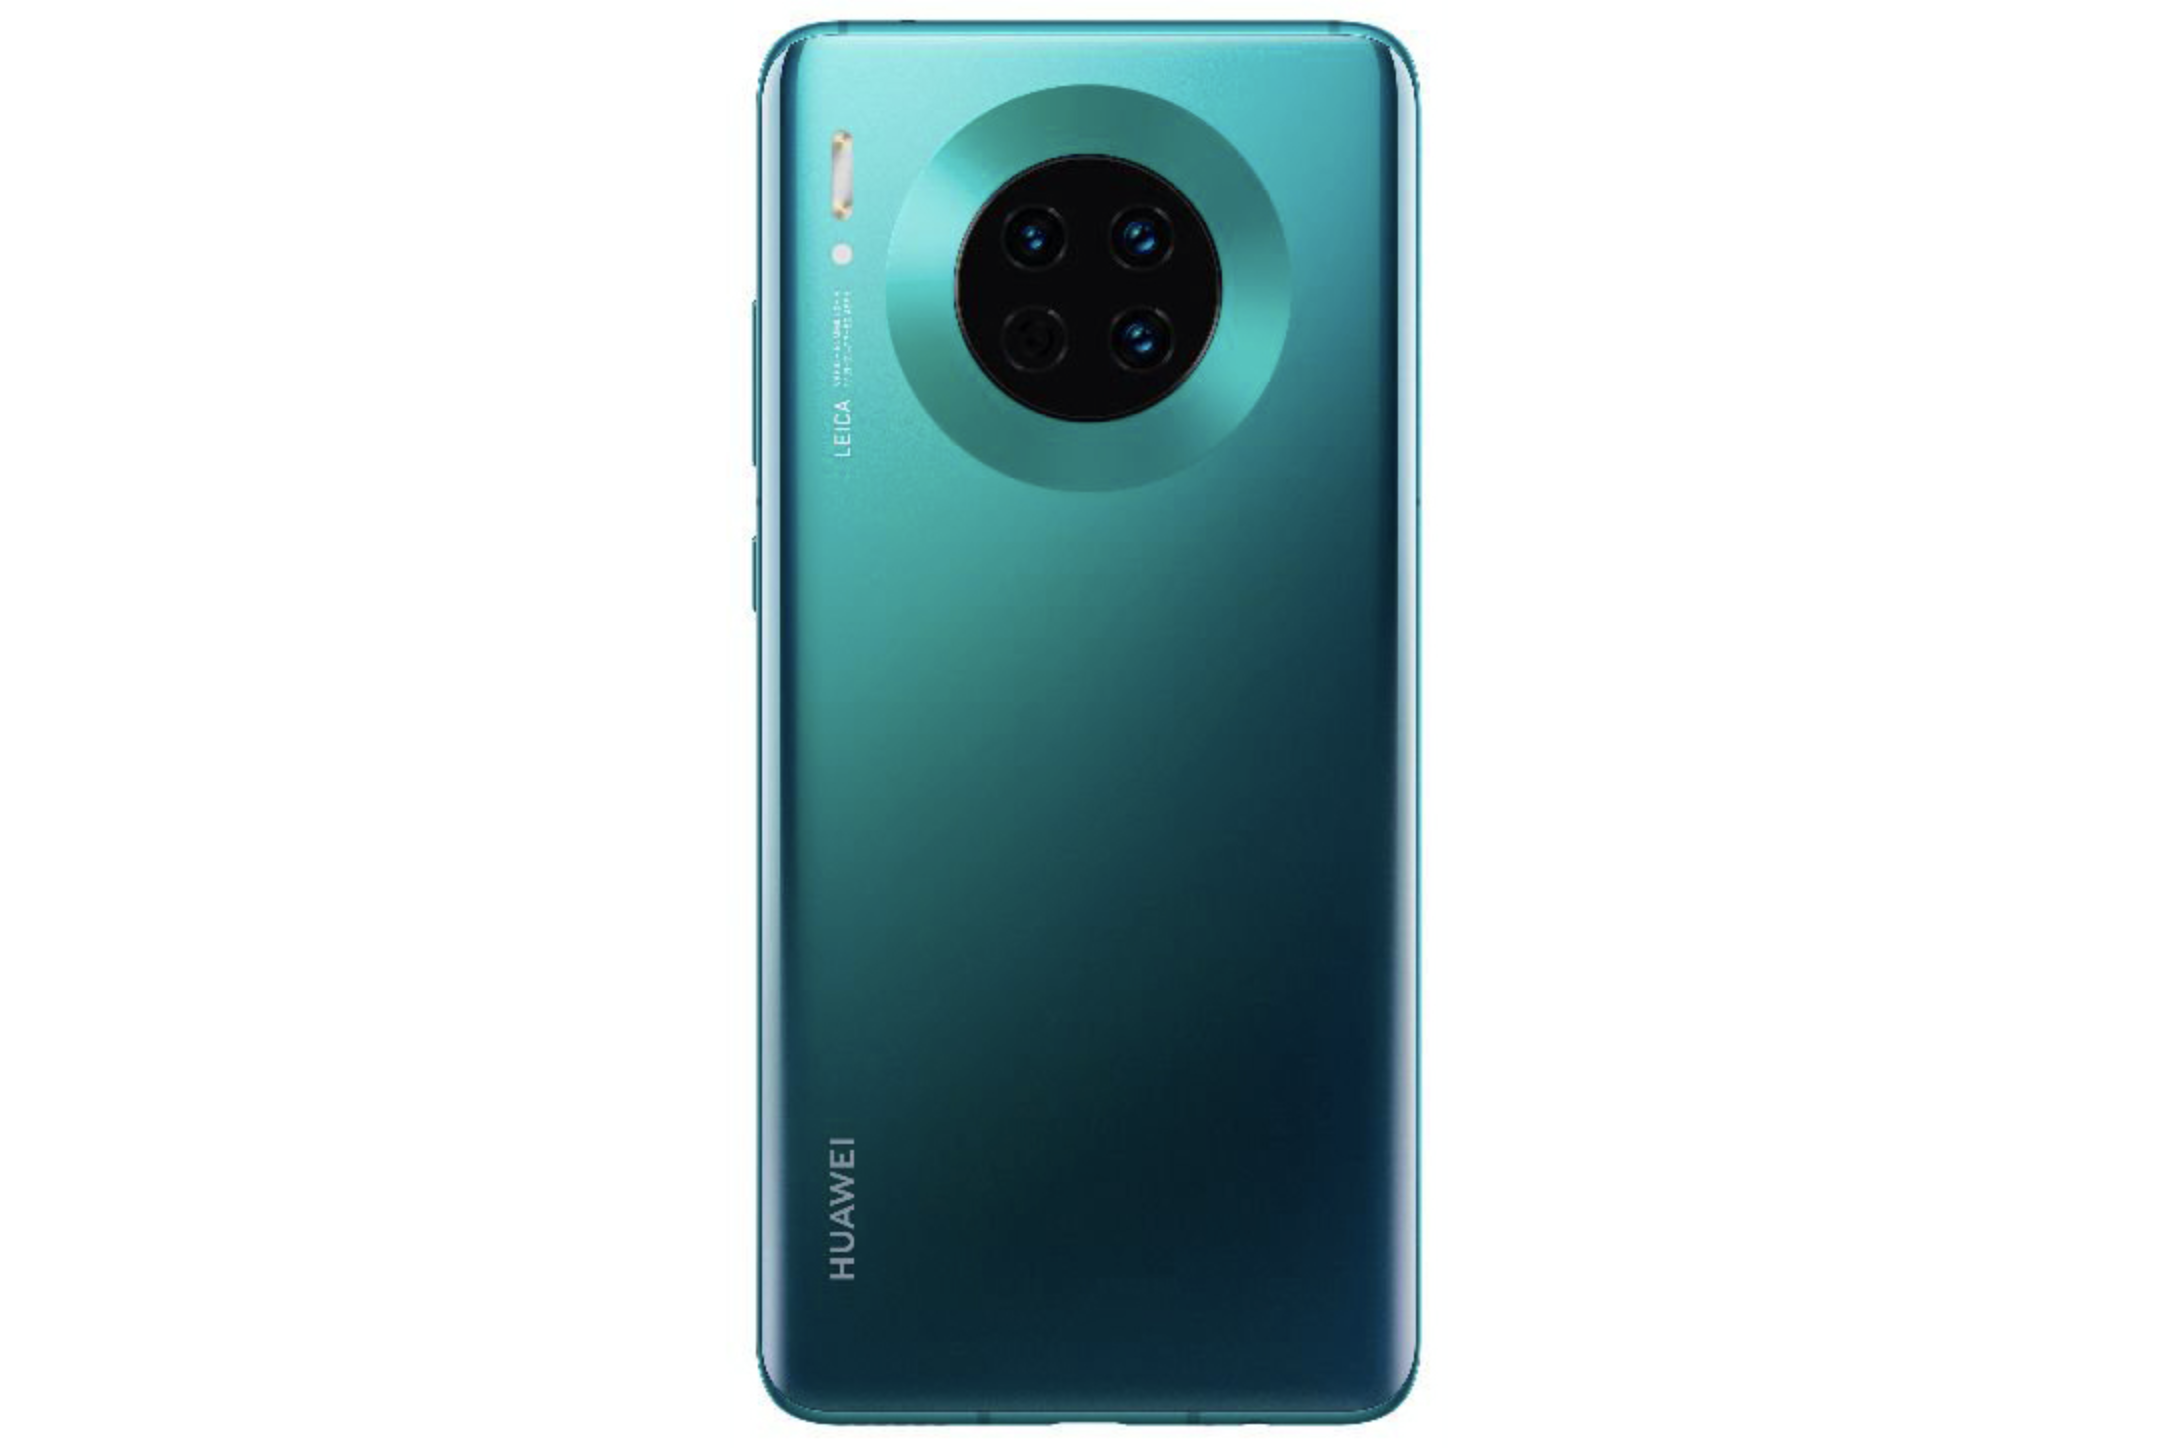 What will the Huawei Mate 30 Pro look like?